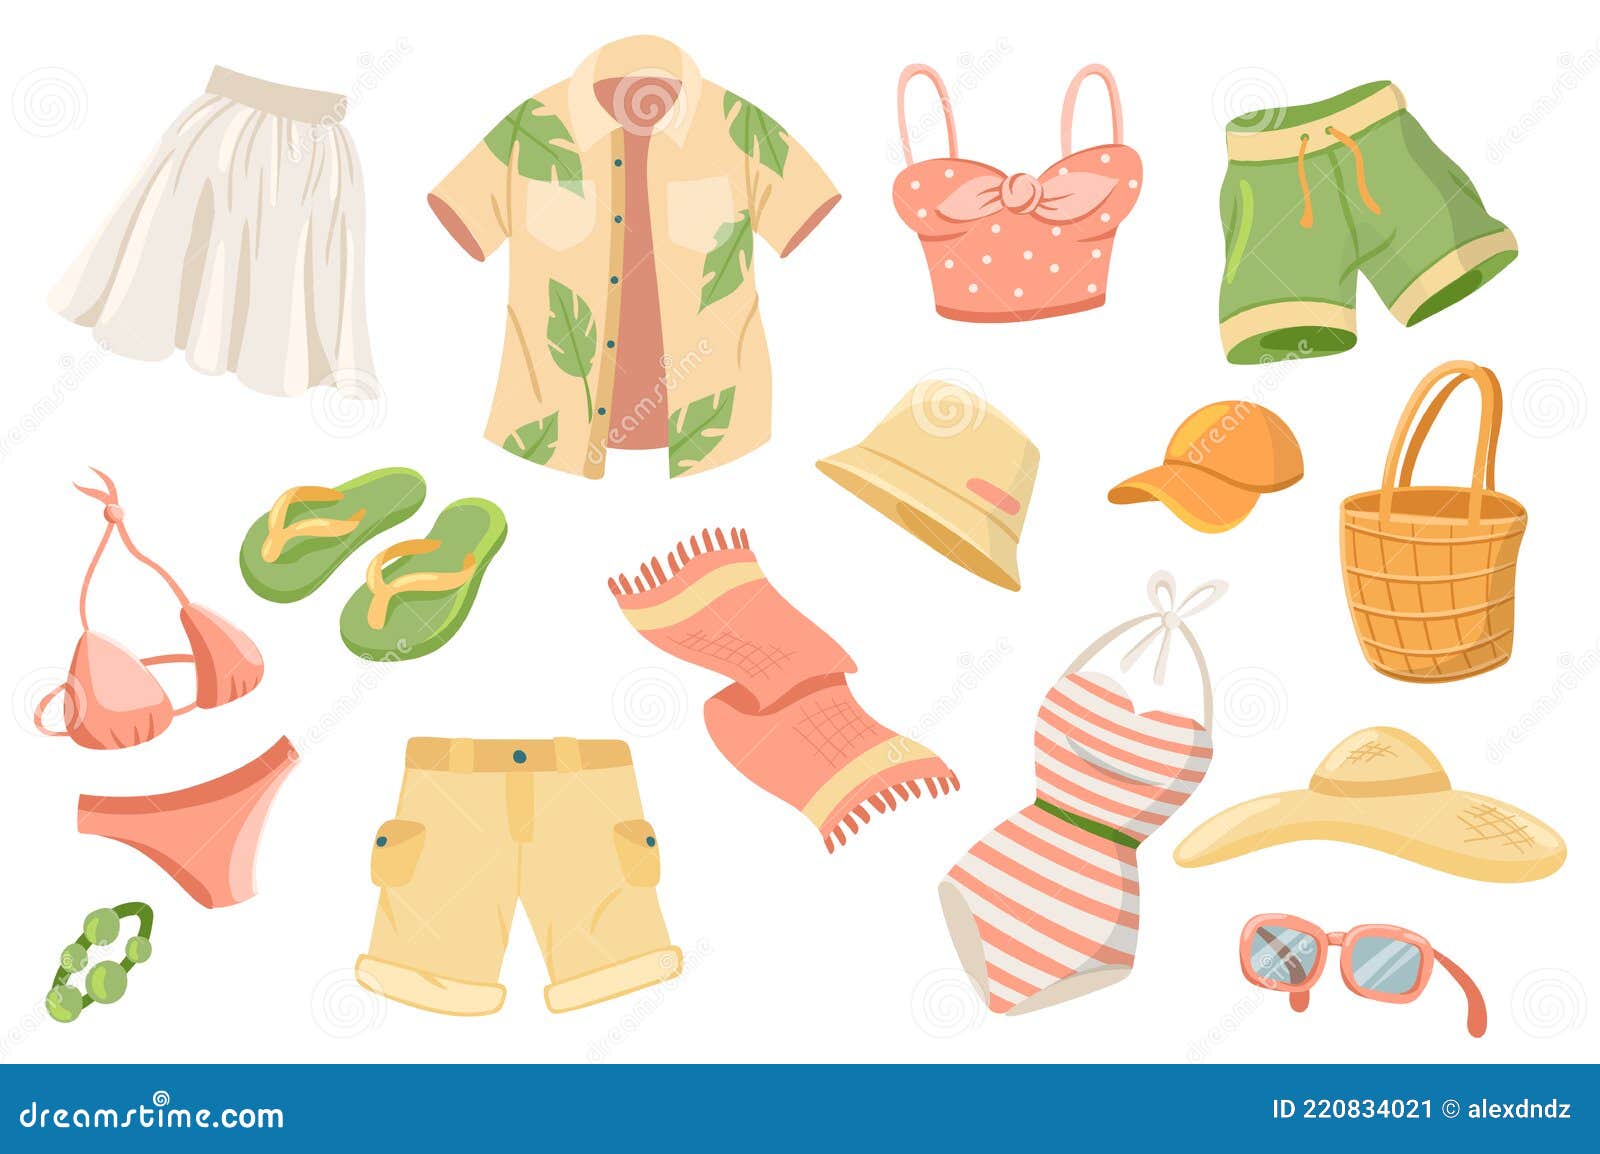 Summer Clothing Cute Stickers Isolated Set Stock Vector - Illustration ...